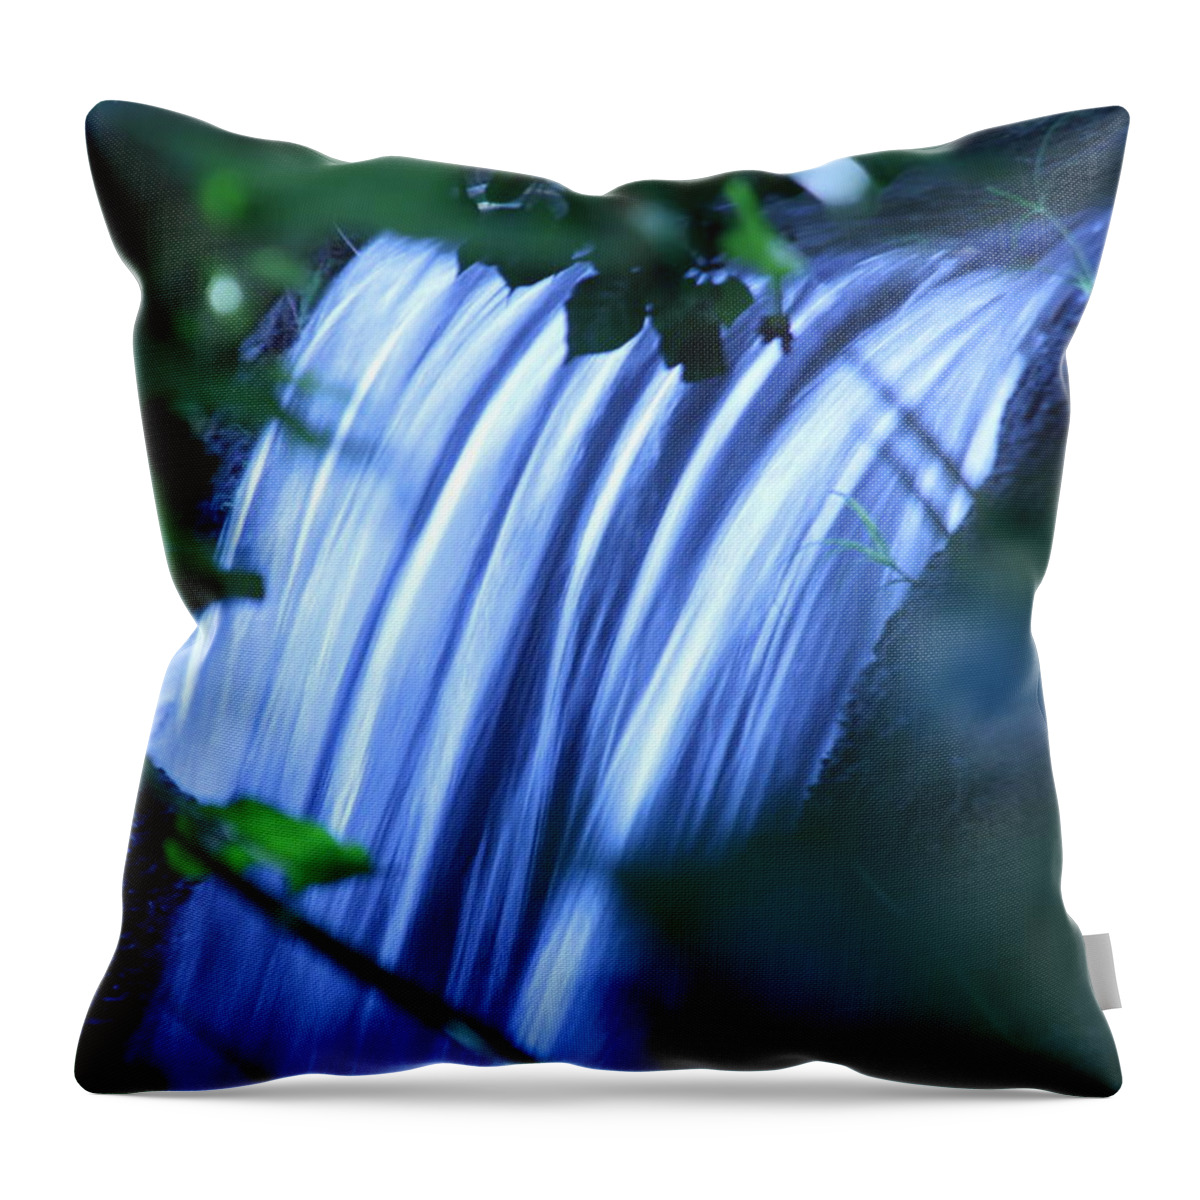 Waterfall Throw Pillow featuring the photograph Another Waterfall by Scott Brown